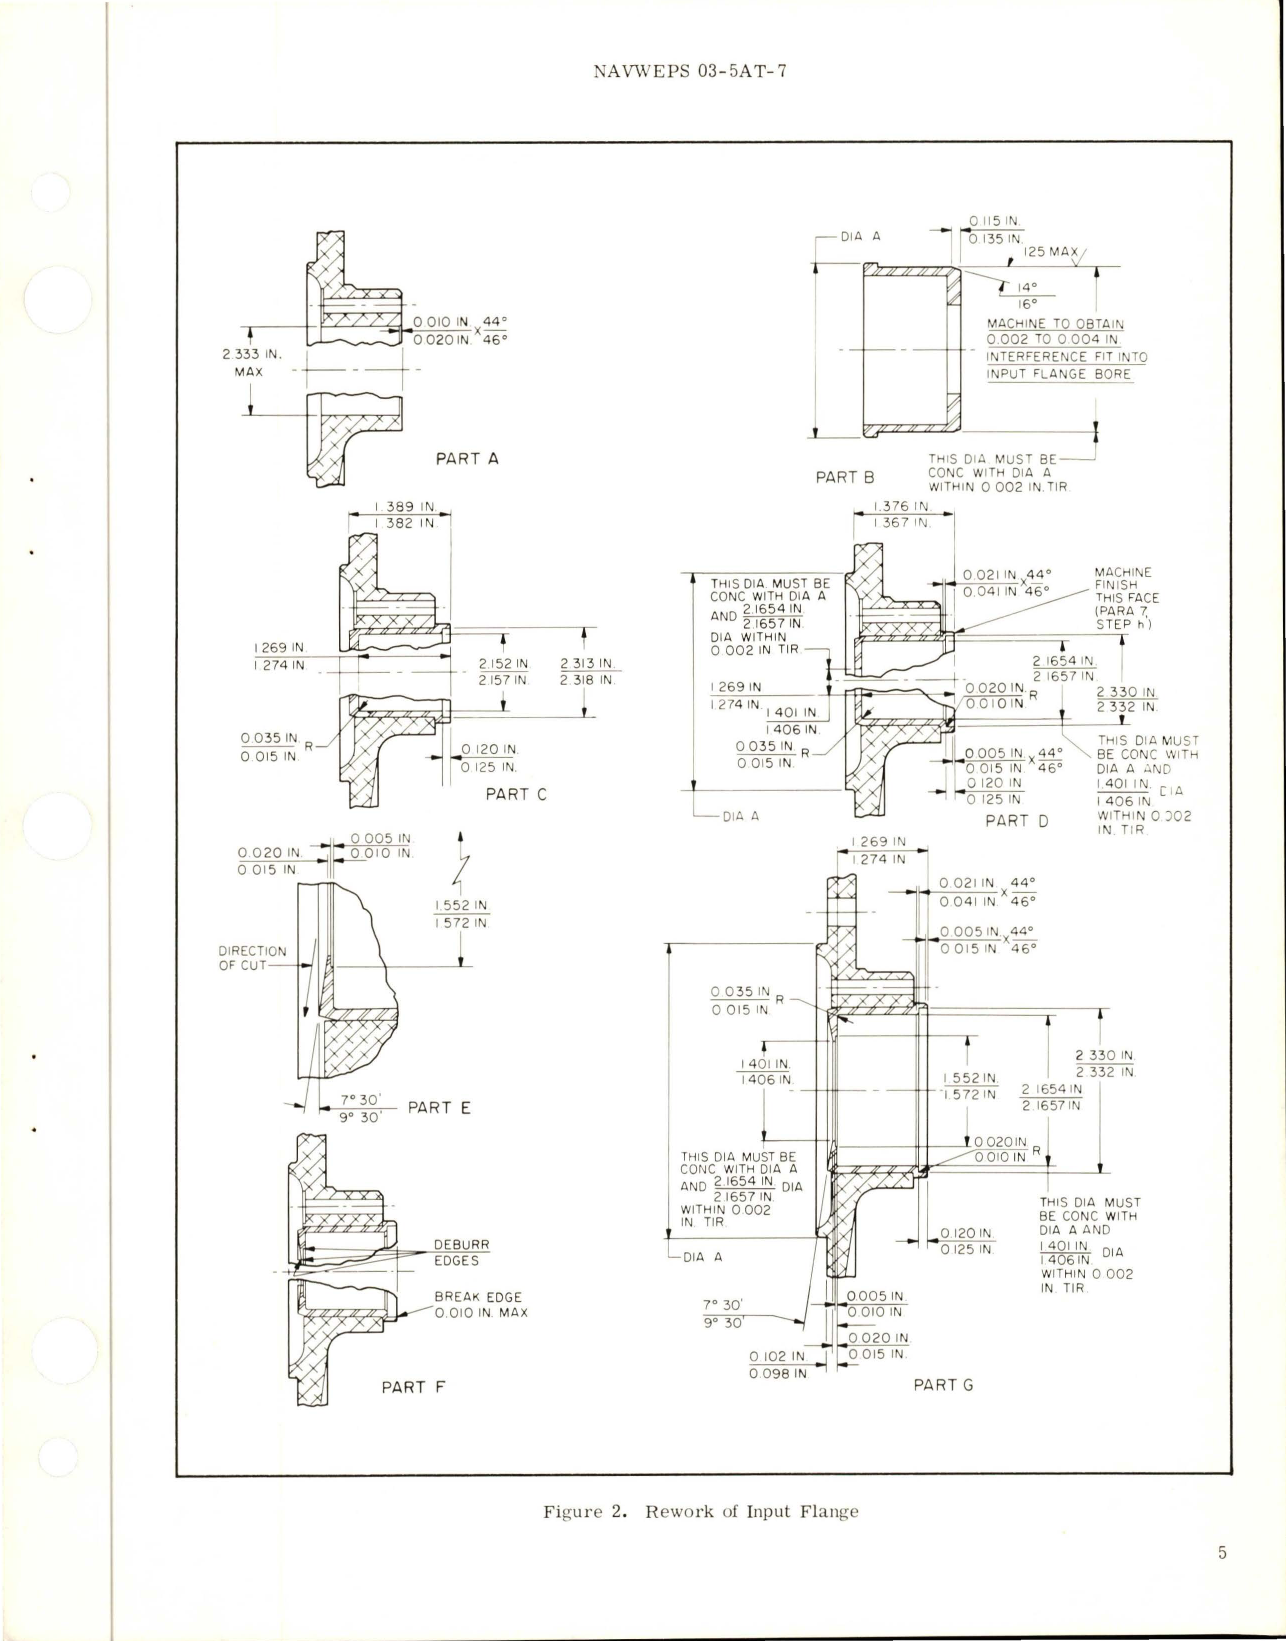 Sample page 7 from AirCorps Library document: Overhaul Instructions with Parts Breakdown for Constant Ratio Power Transmission Shaft 